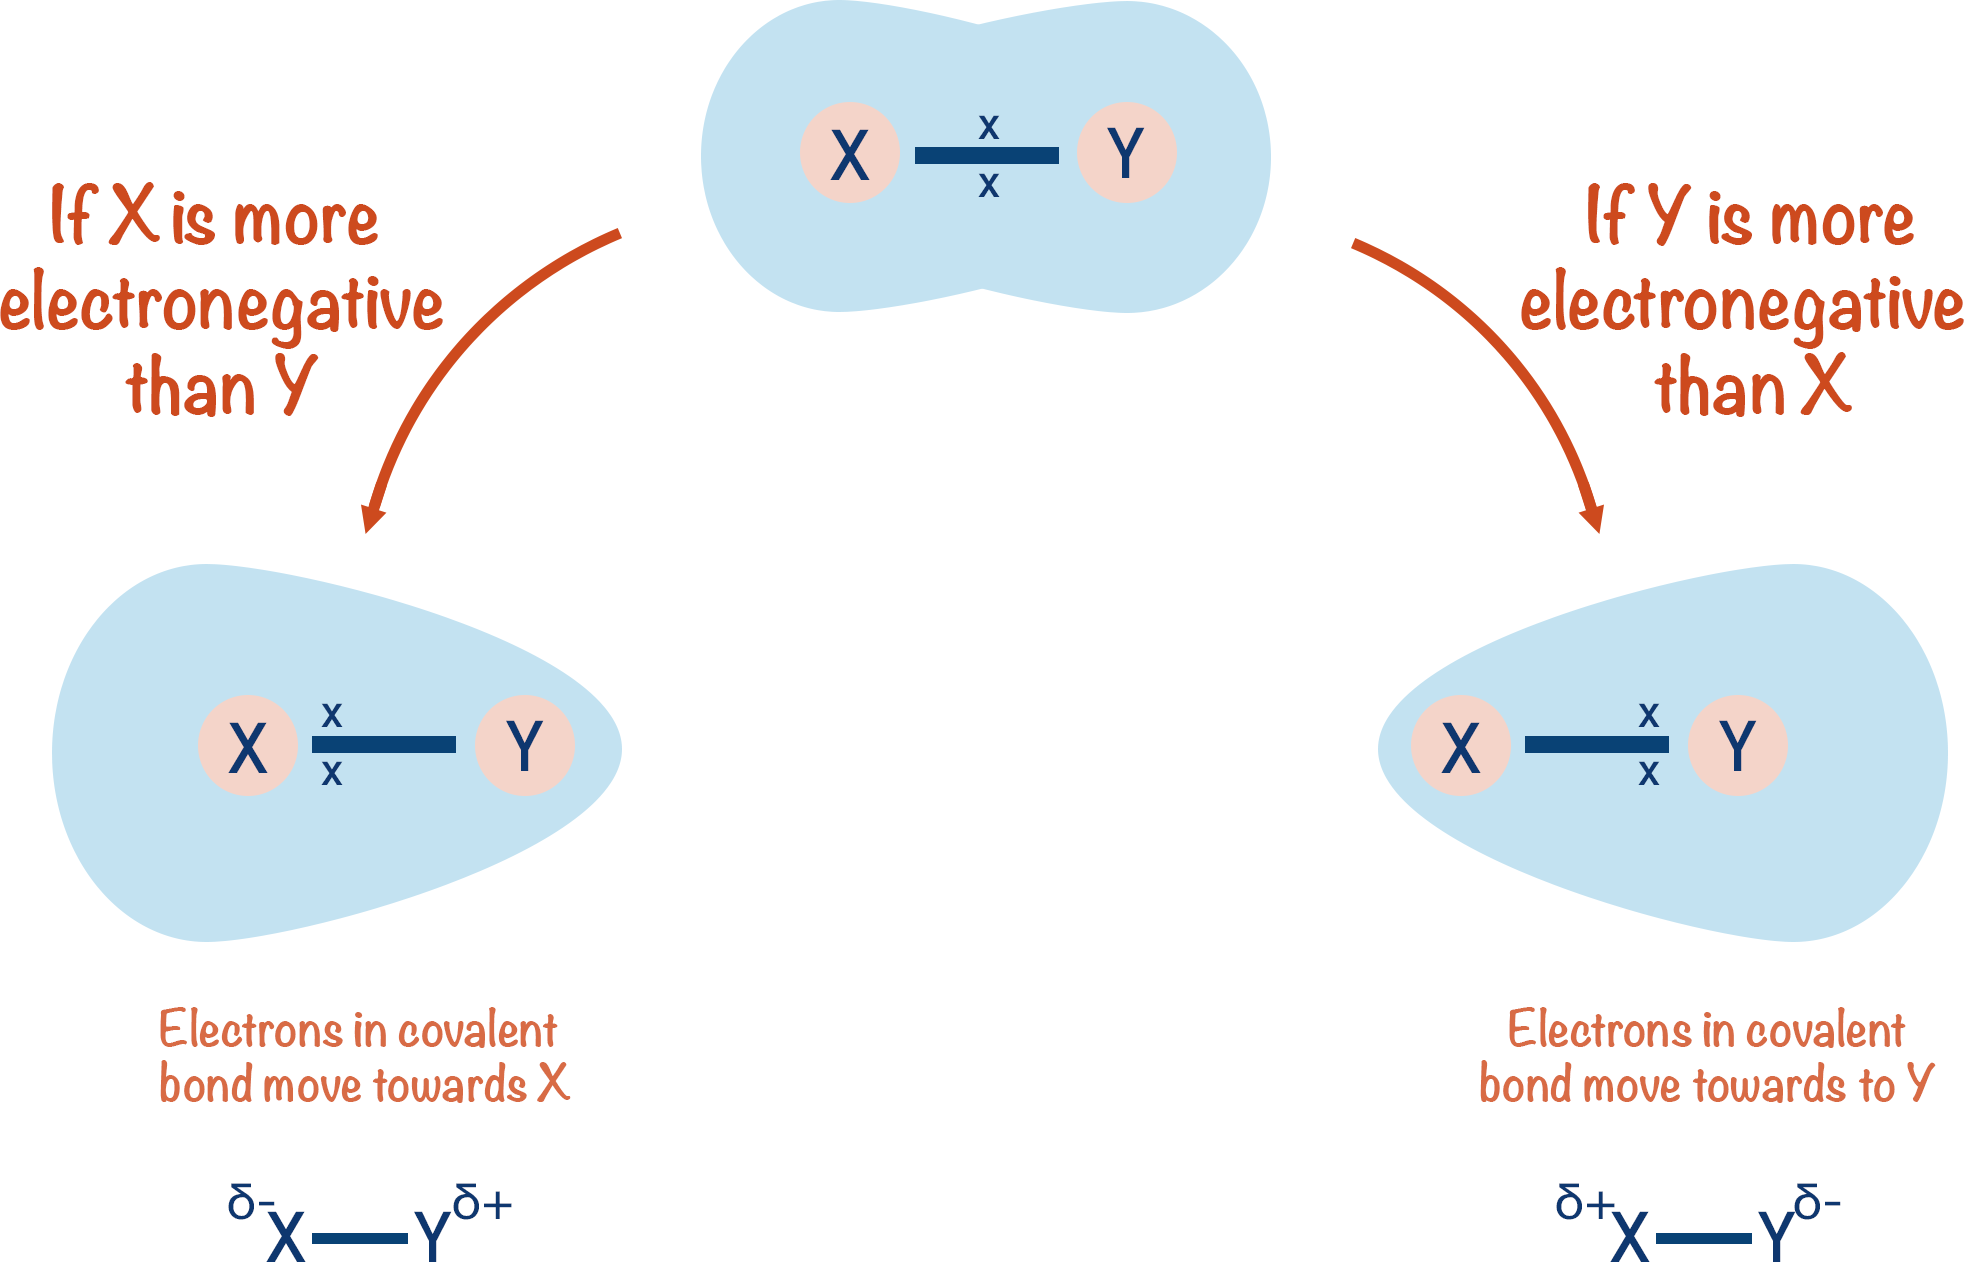 electronegativity and forming polar bonds different electronegativities